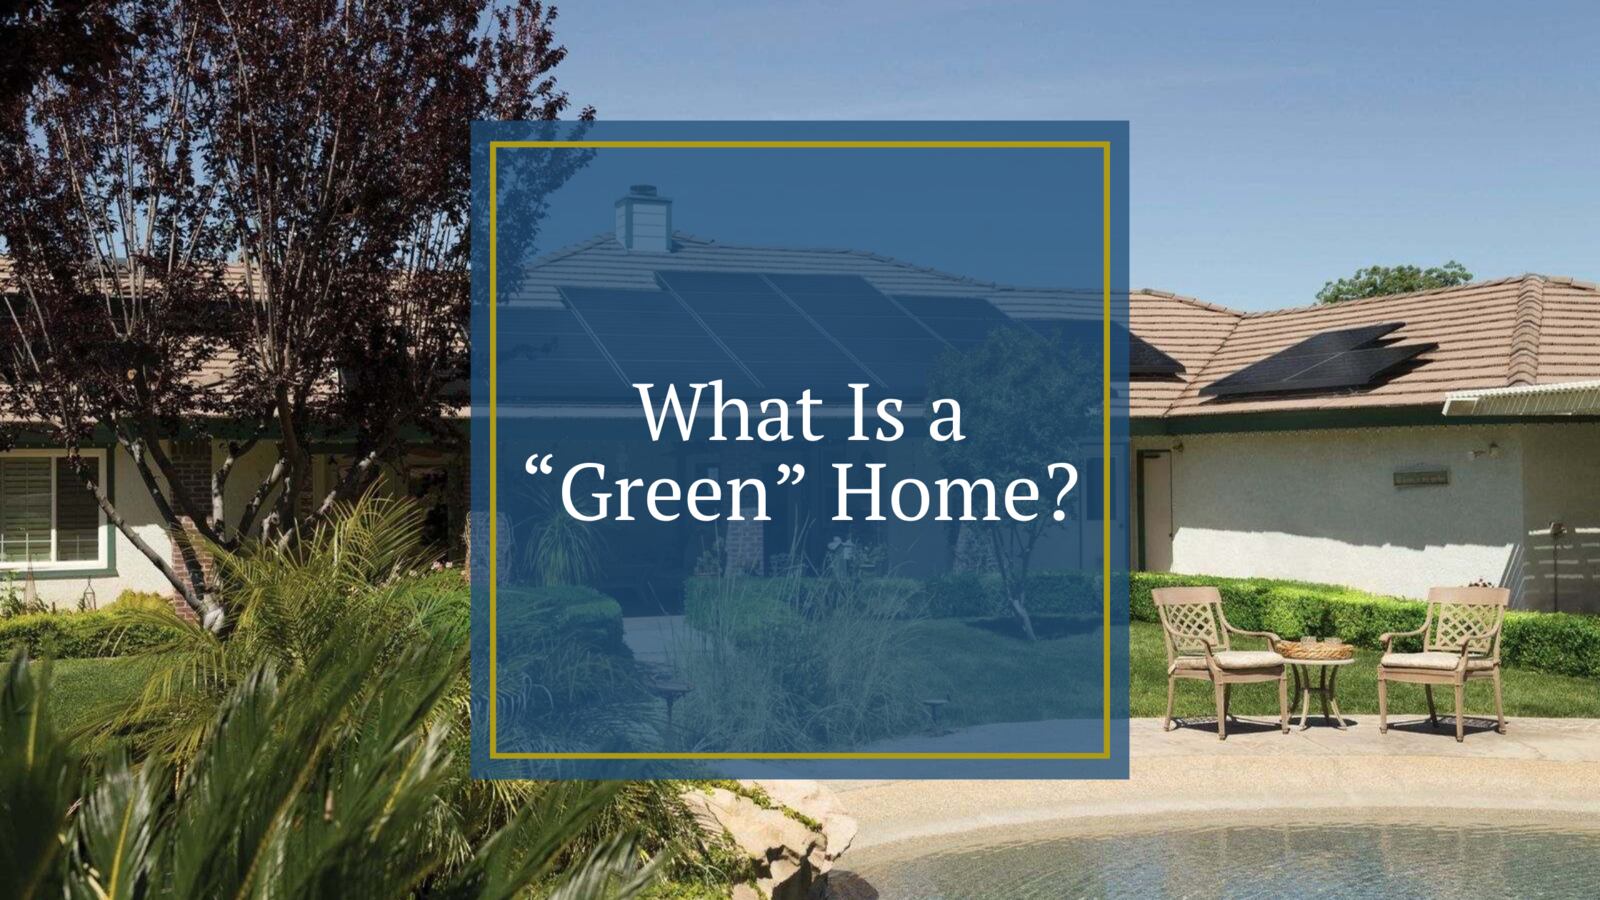 What Is a “Green” Home?